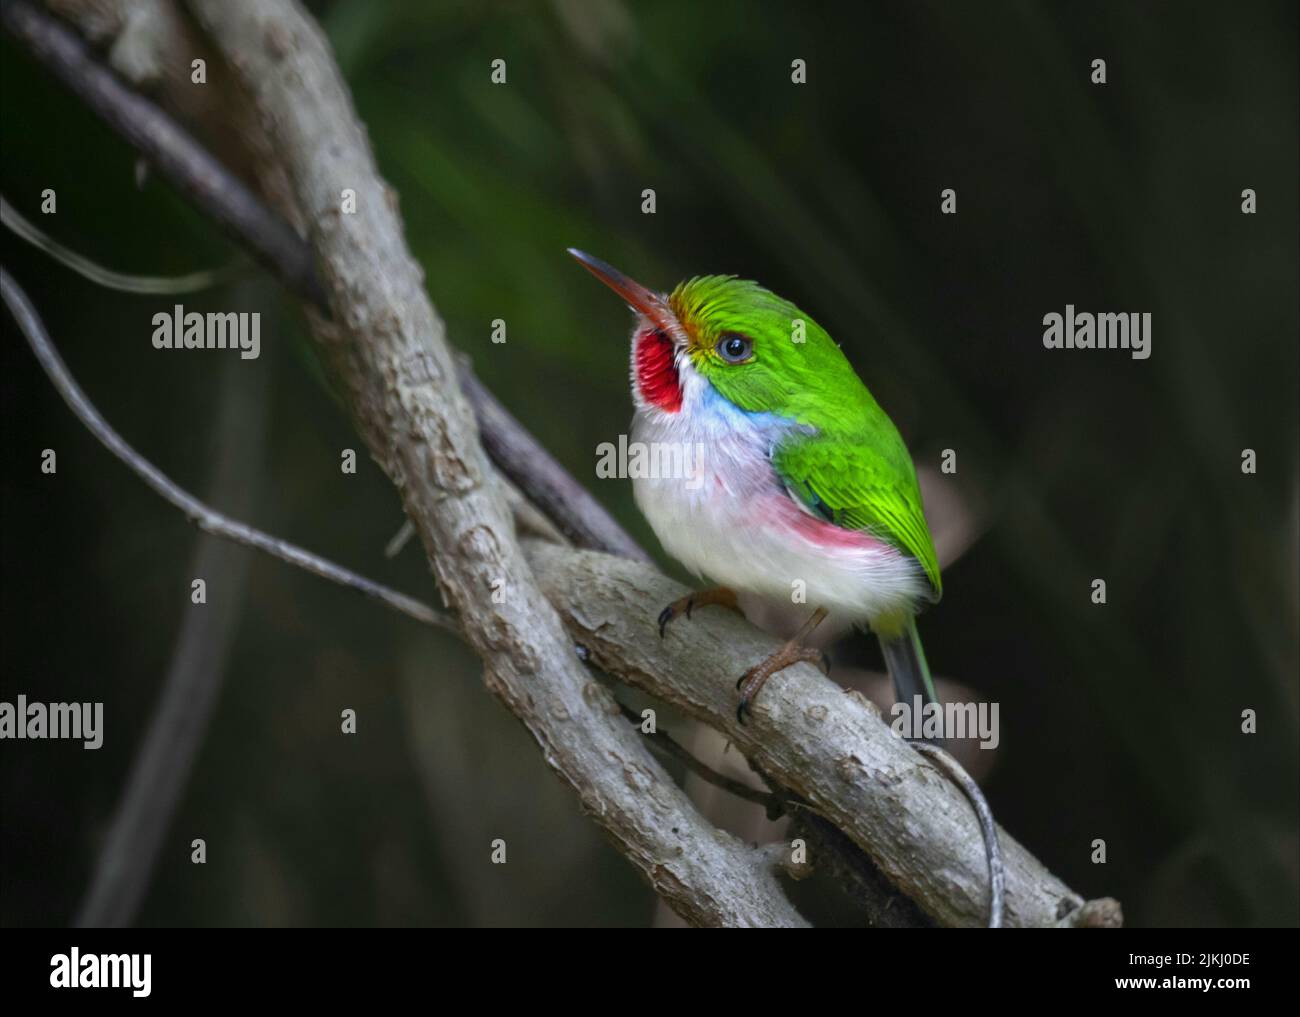 A closeup of a cute Cuban tody bird on a branch in a forest Stock Photo